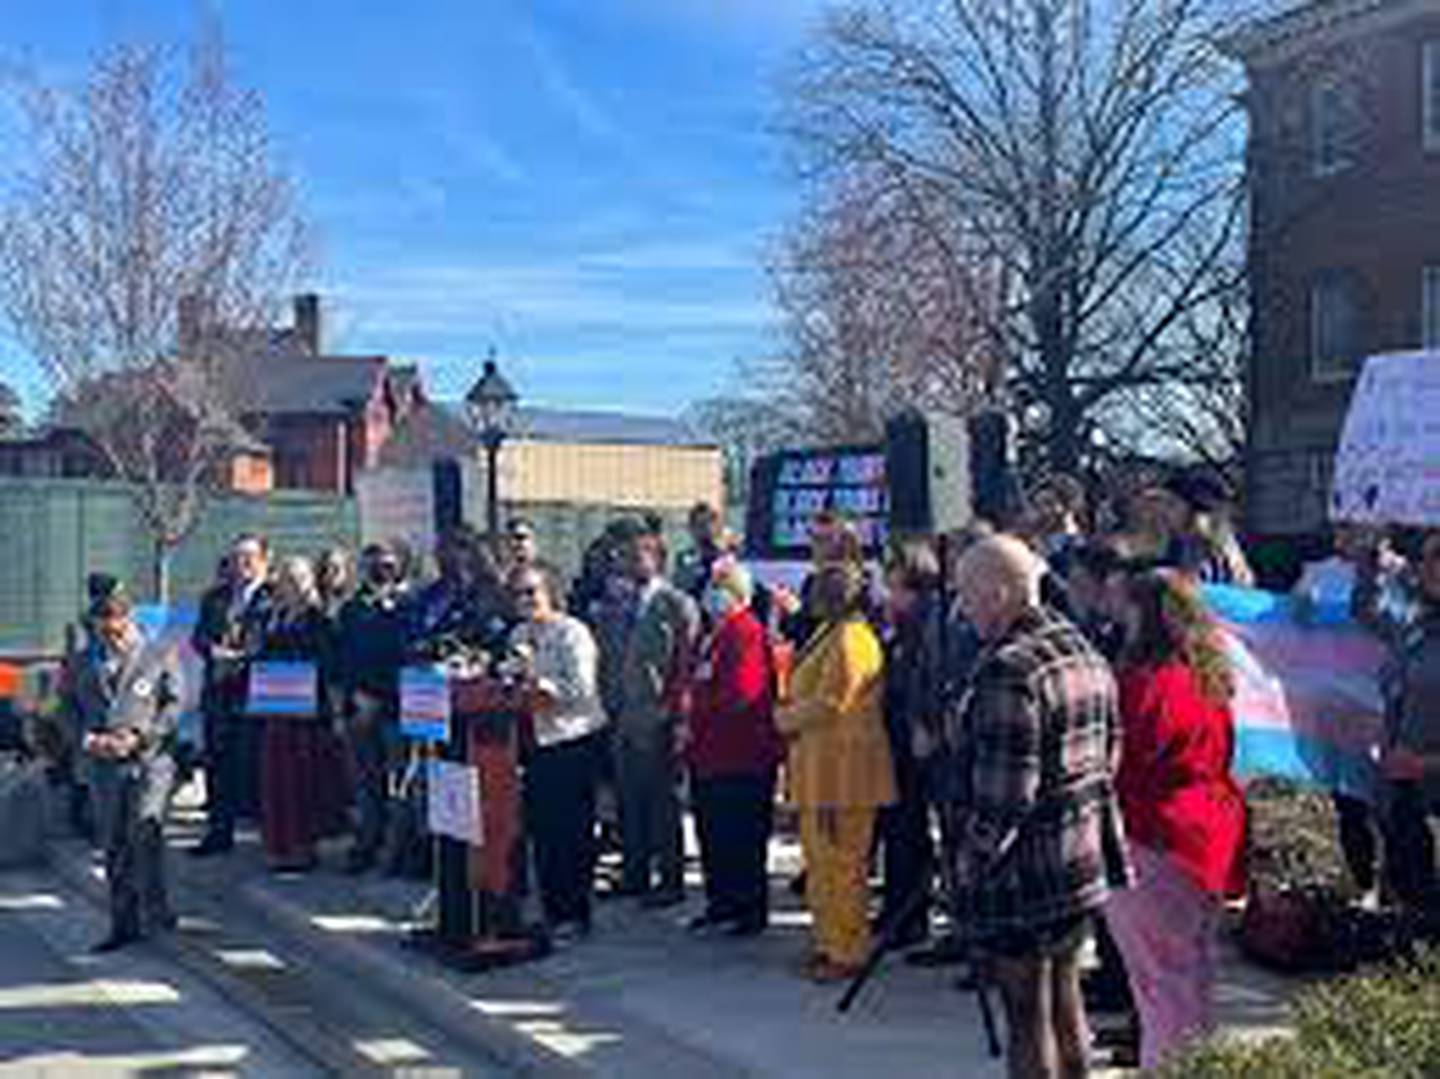 Supporters of trans health bills speak in front of Maryland State House on Feb. 14, 2023 in Annapolis, Maryland.